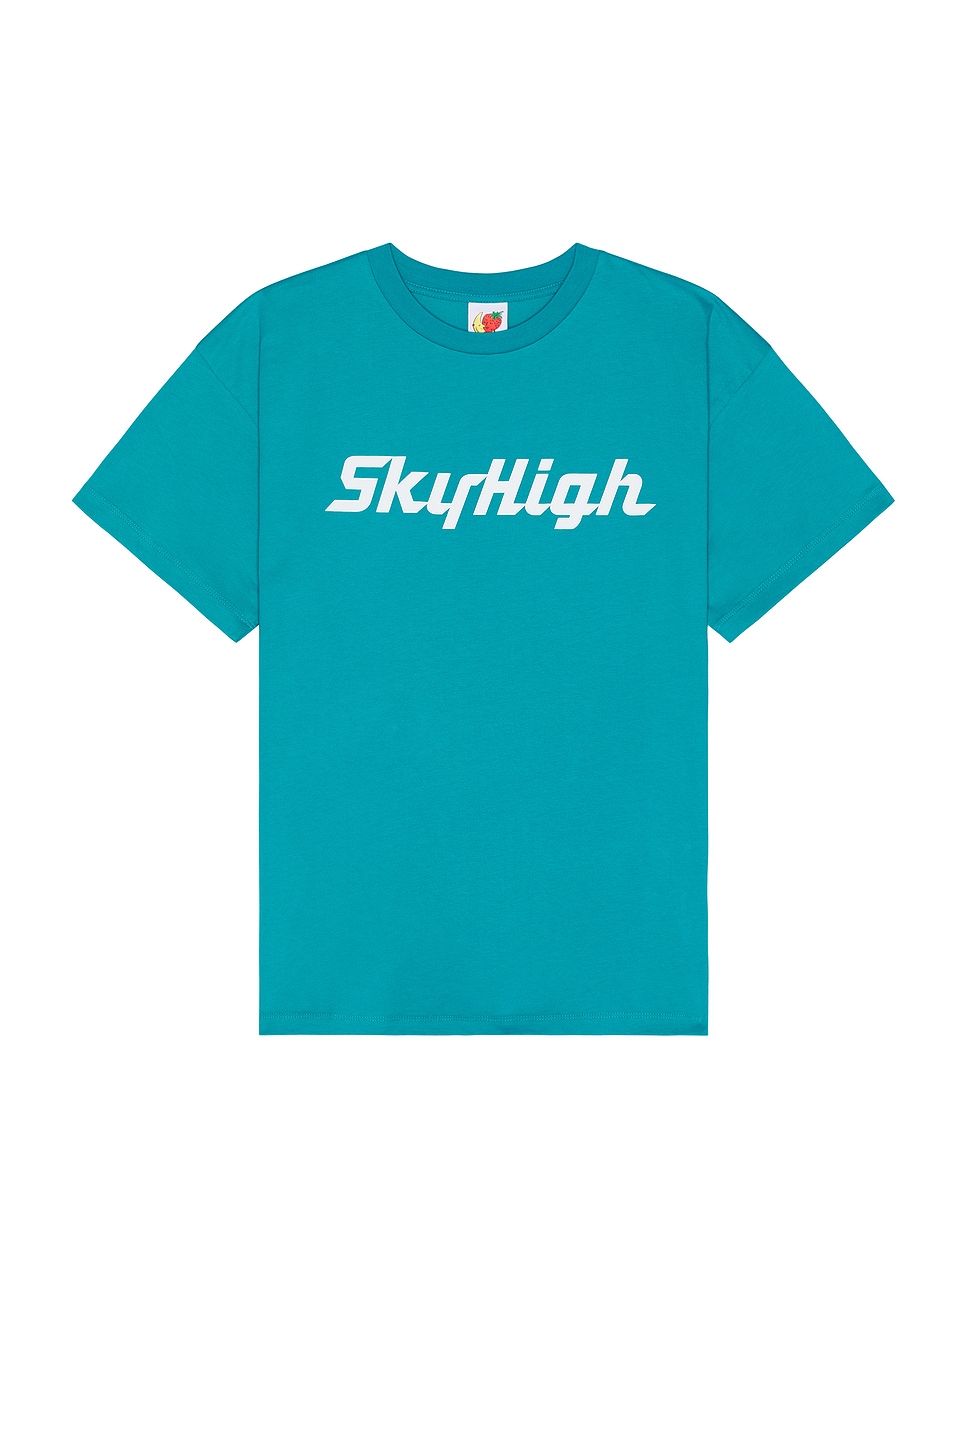 Image 1 of Sky High Farm Workwear Construction Graphic Logo #1 T Shirt in Teal